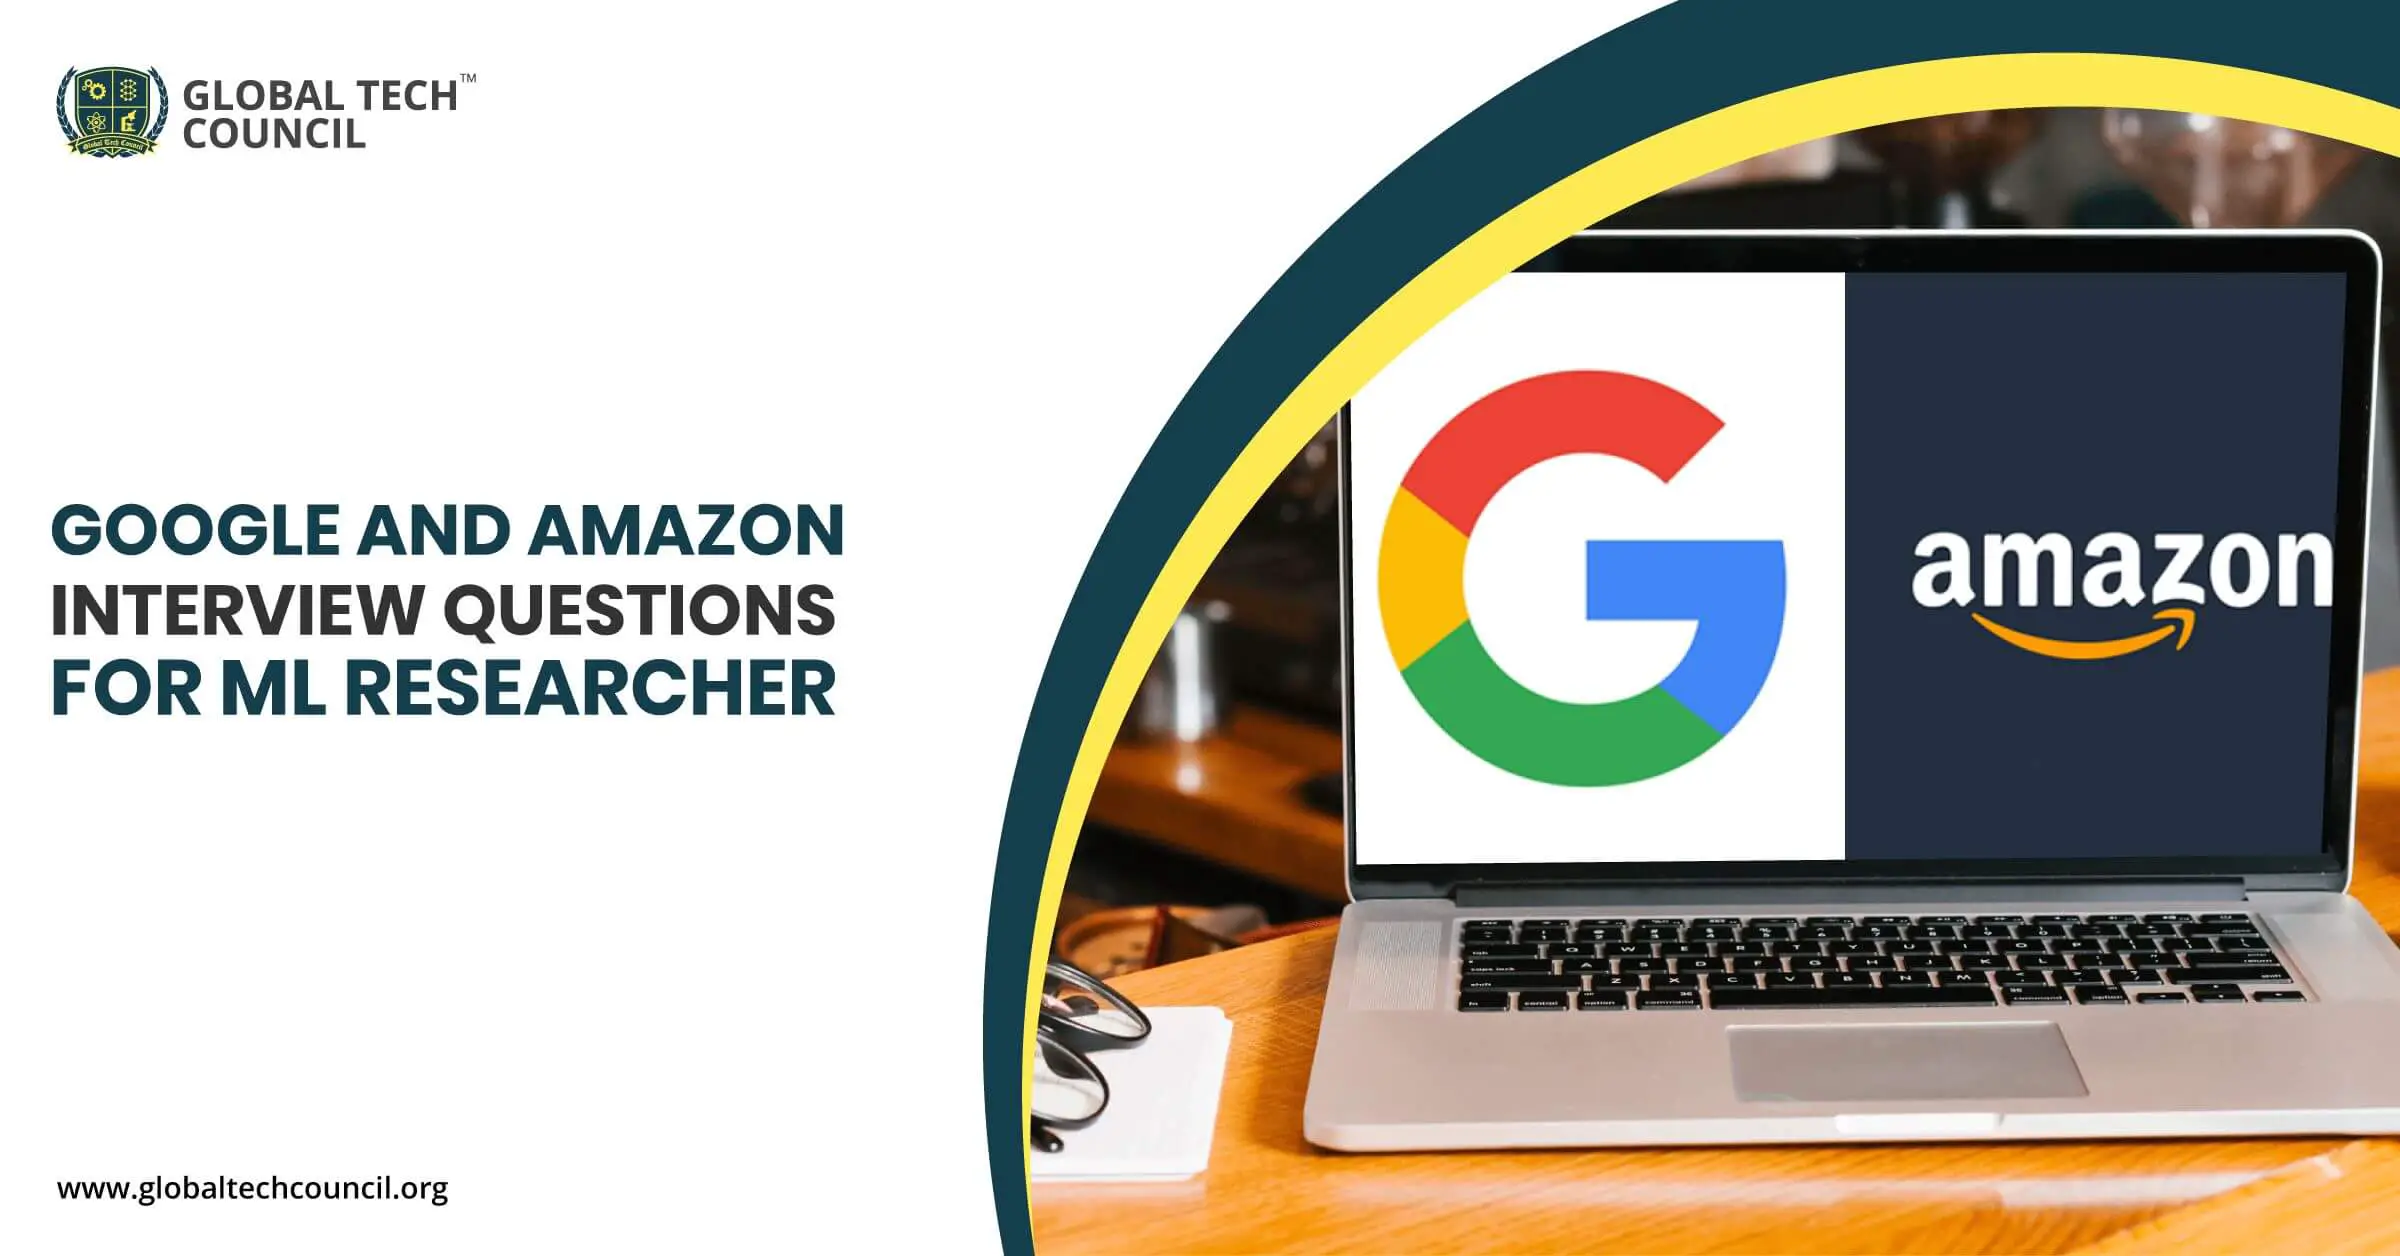 Google and Amazon interview questions for ML researcher